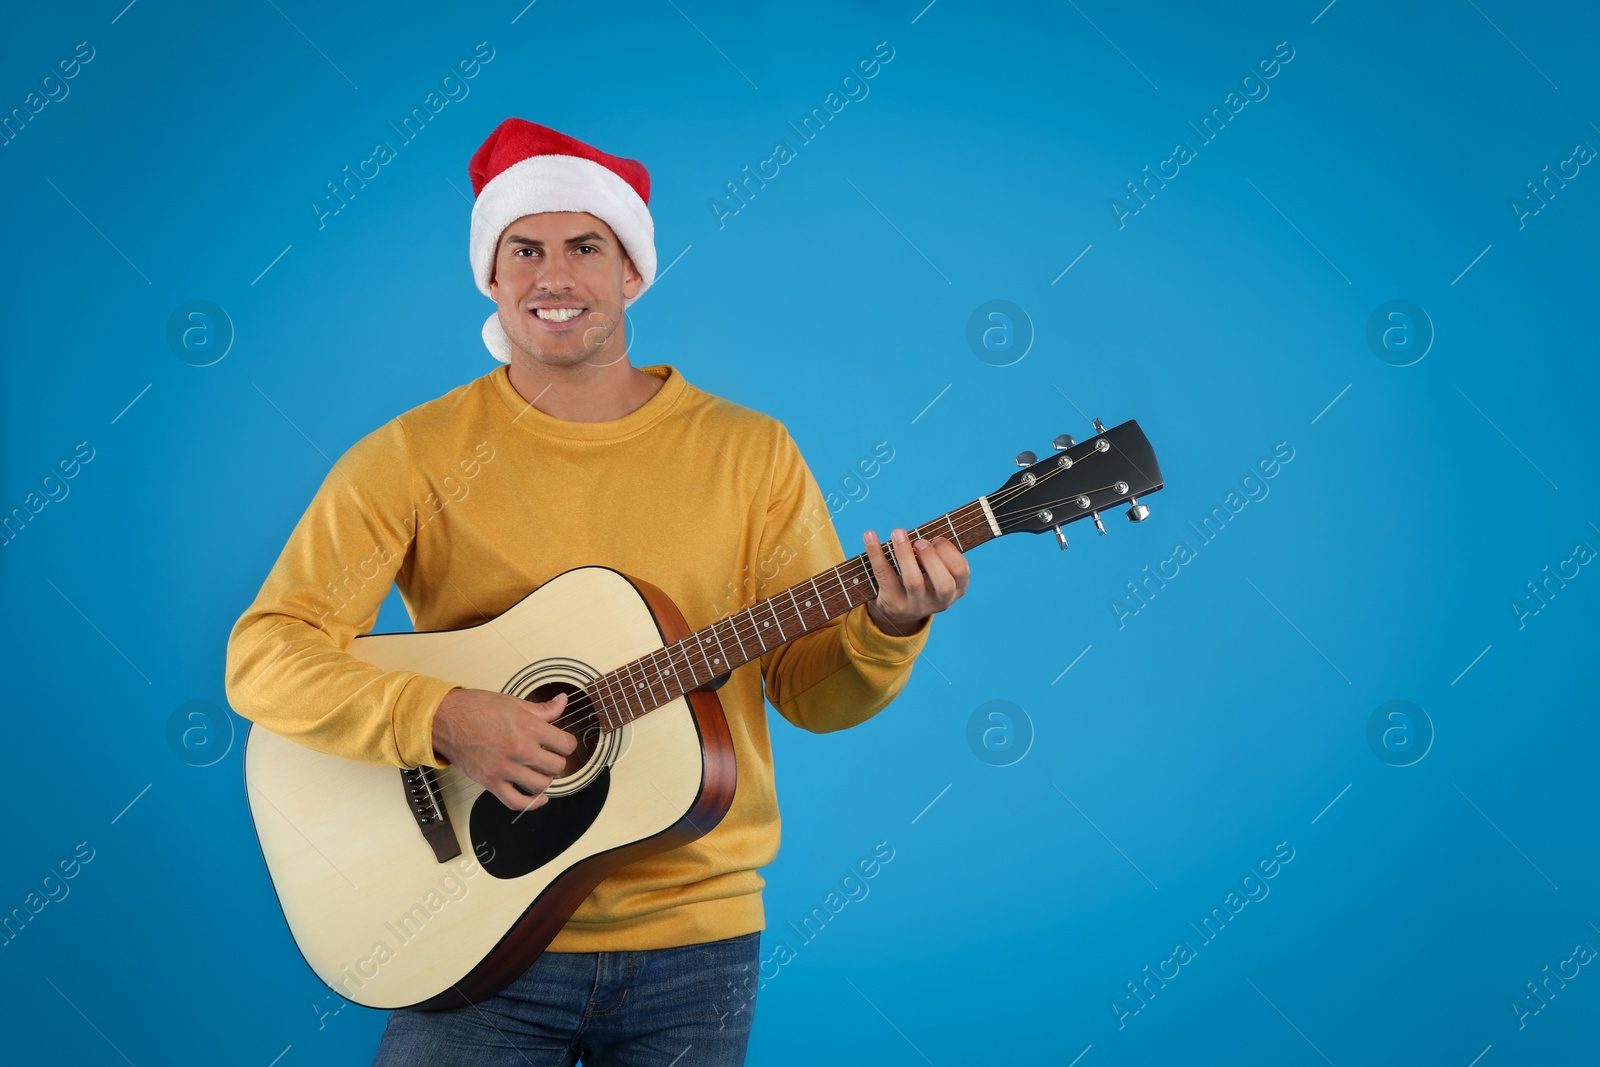 Photo of Man in Santa hat playing acoustic guitar on light blue background. Christmas music